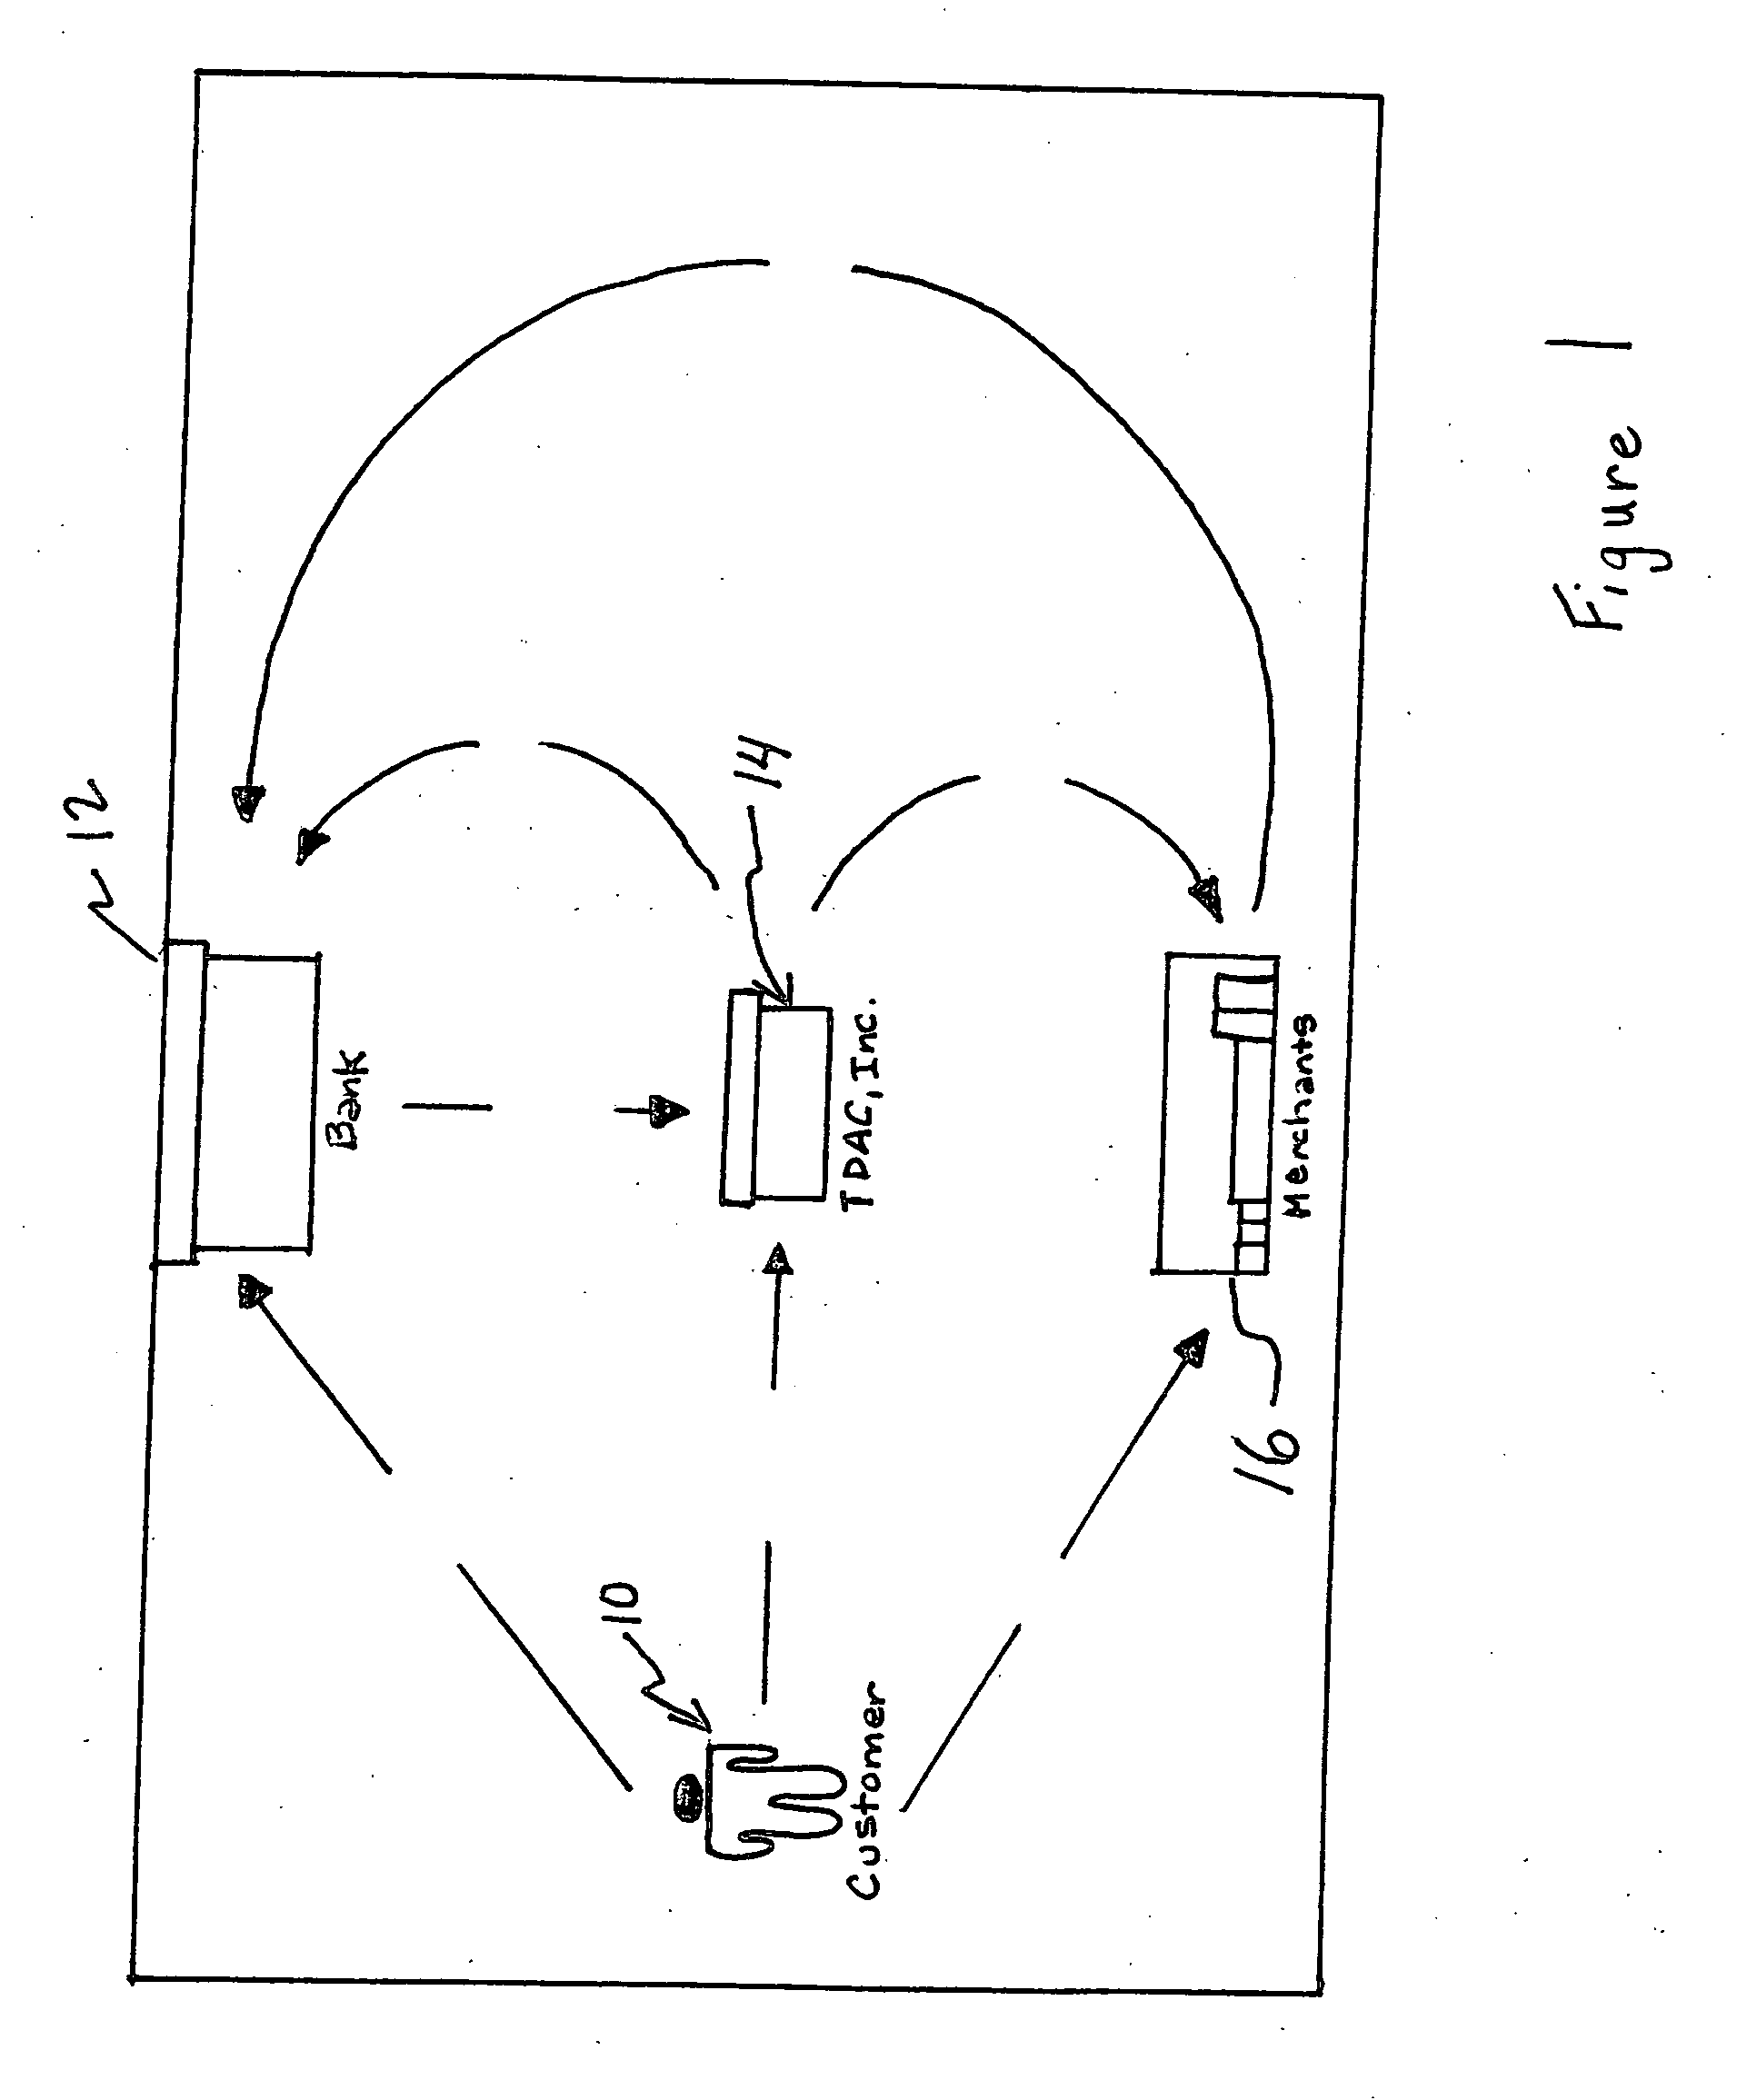 System and method for facilitating commercial transactions